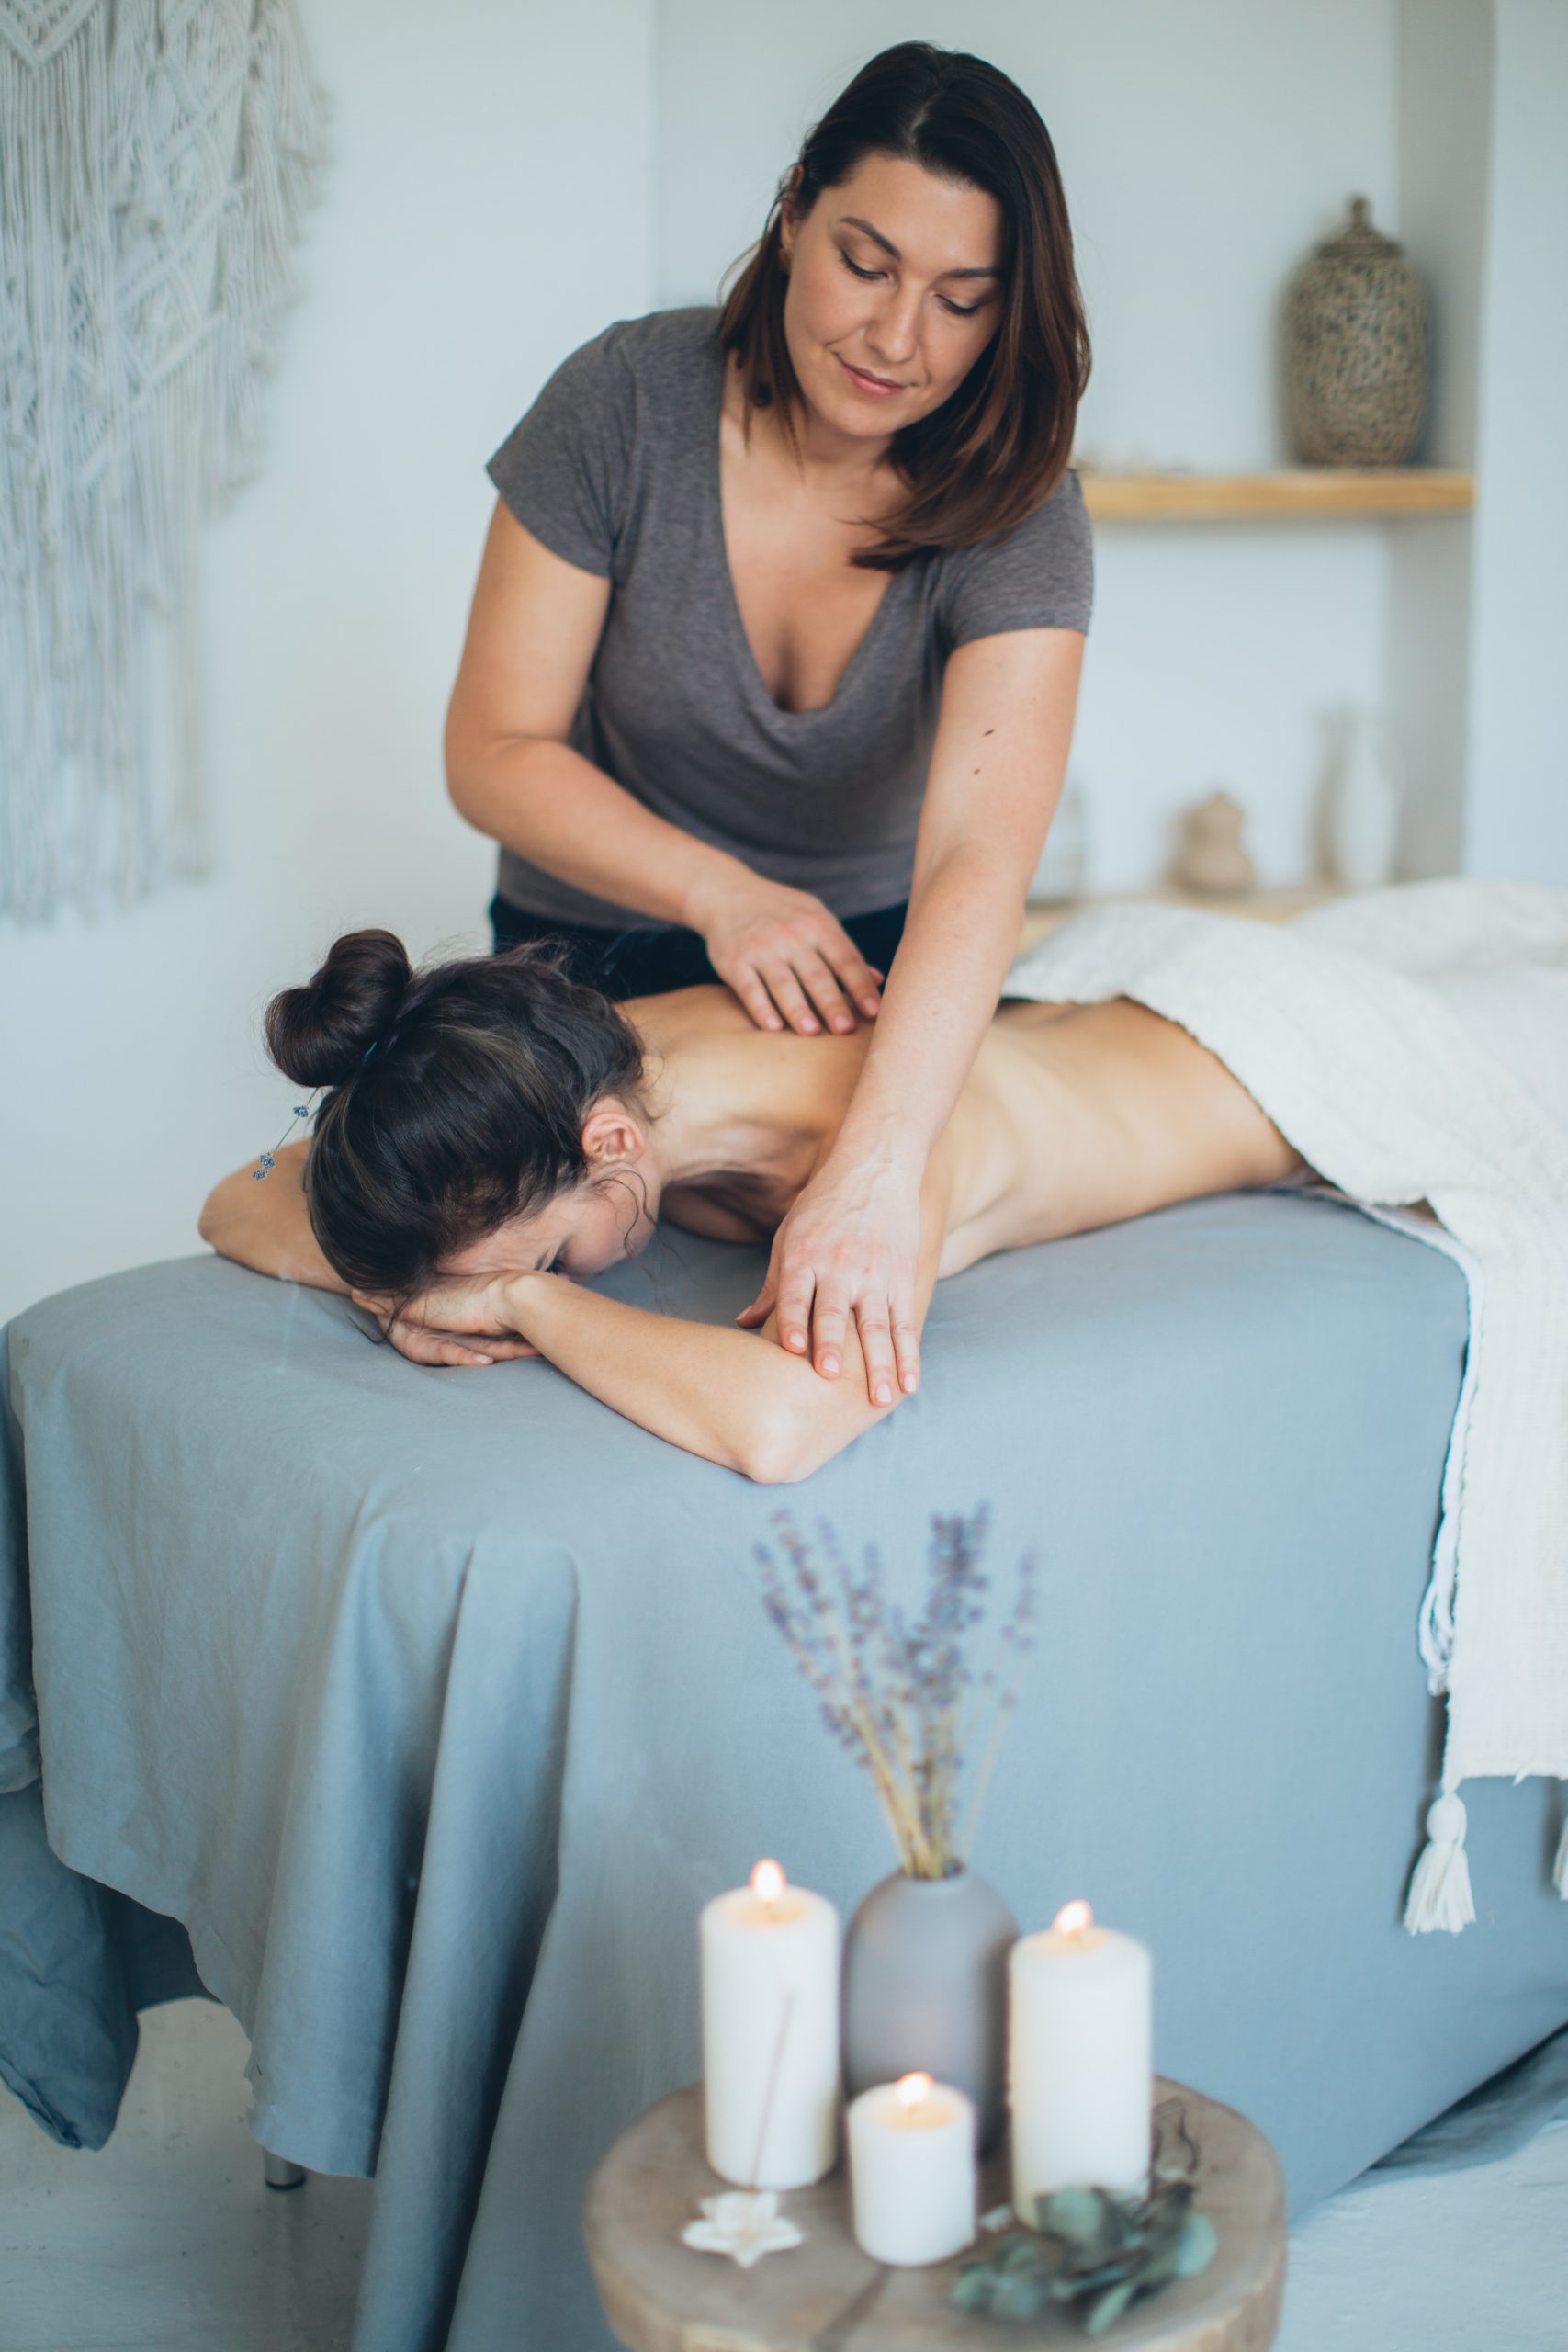 woman-lying-on-bed-while-having-a-massage-3865792-1